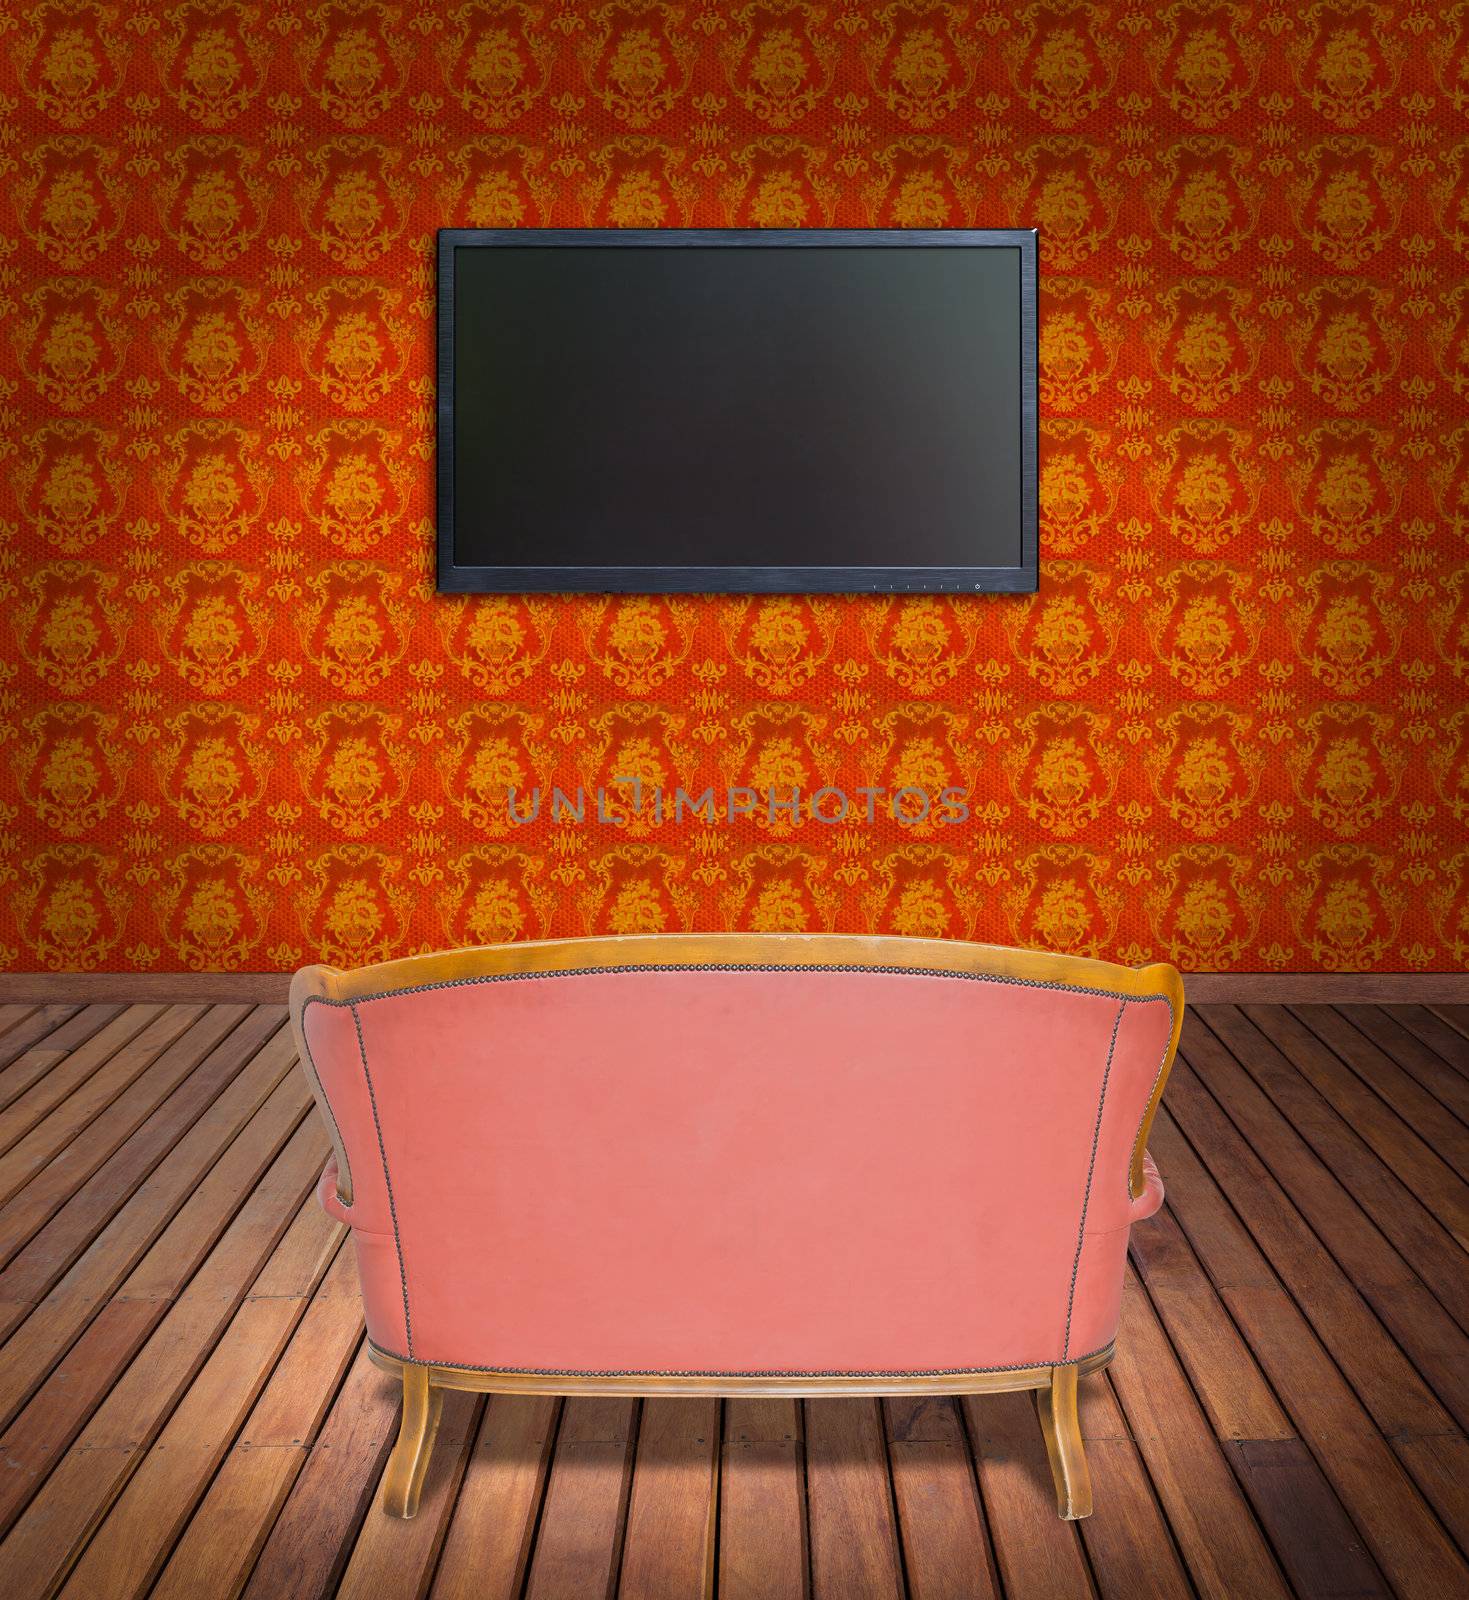 television and sofa in orange wallpaper room